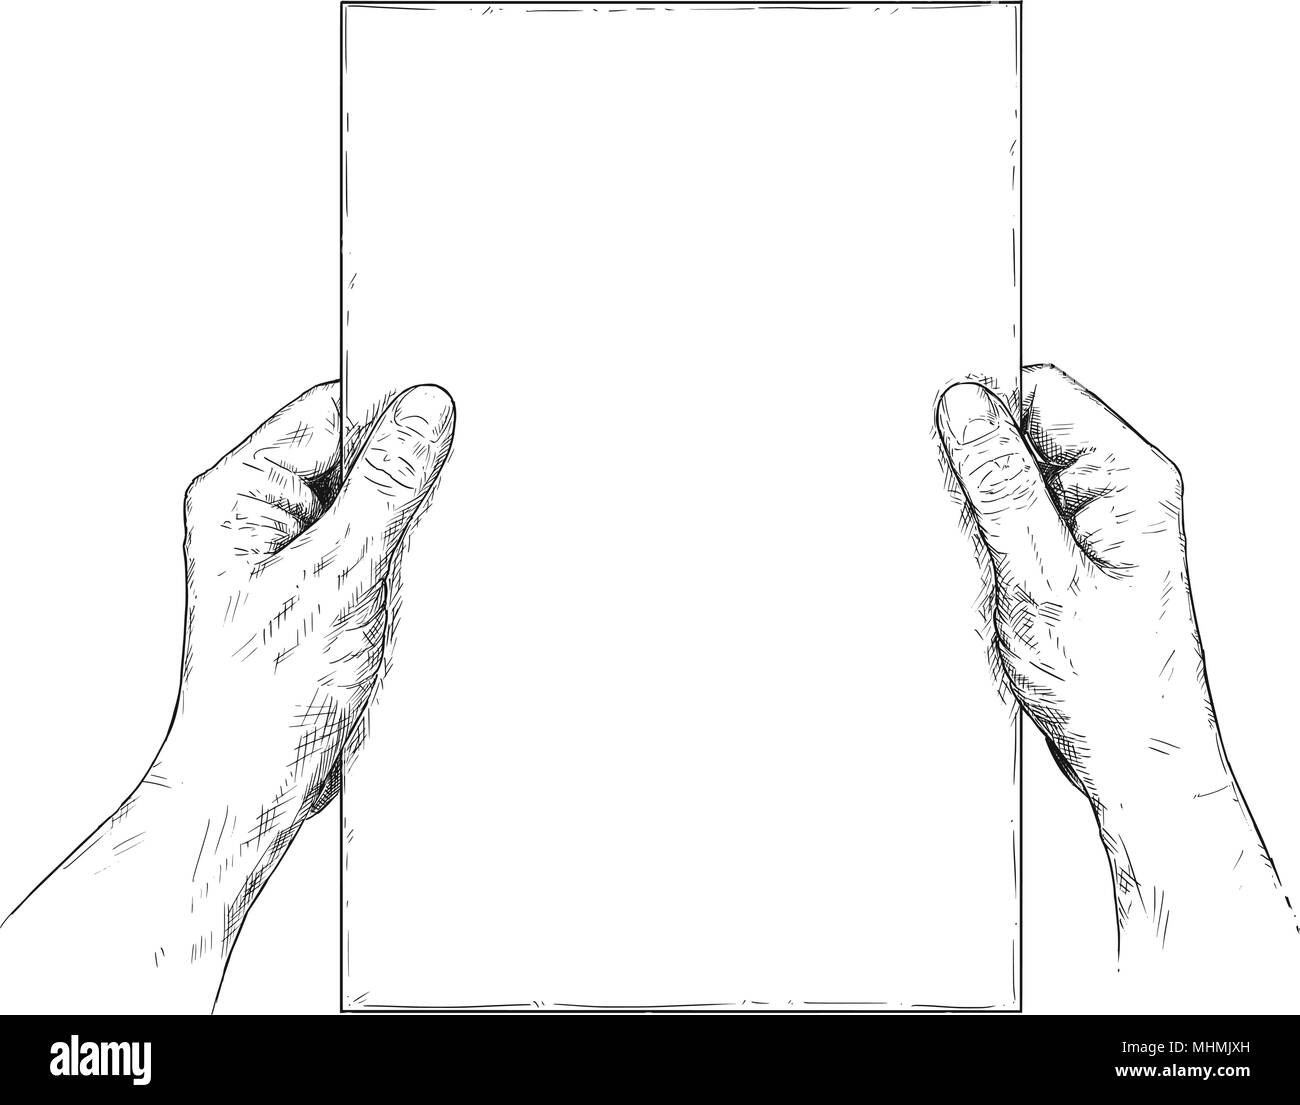 Vector Artistic Illustration or Drawing of Hands Holding Blank Sheet of Paper Stock Vector